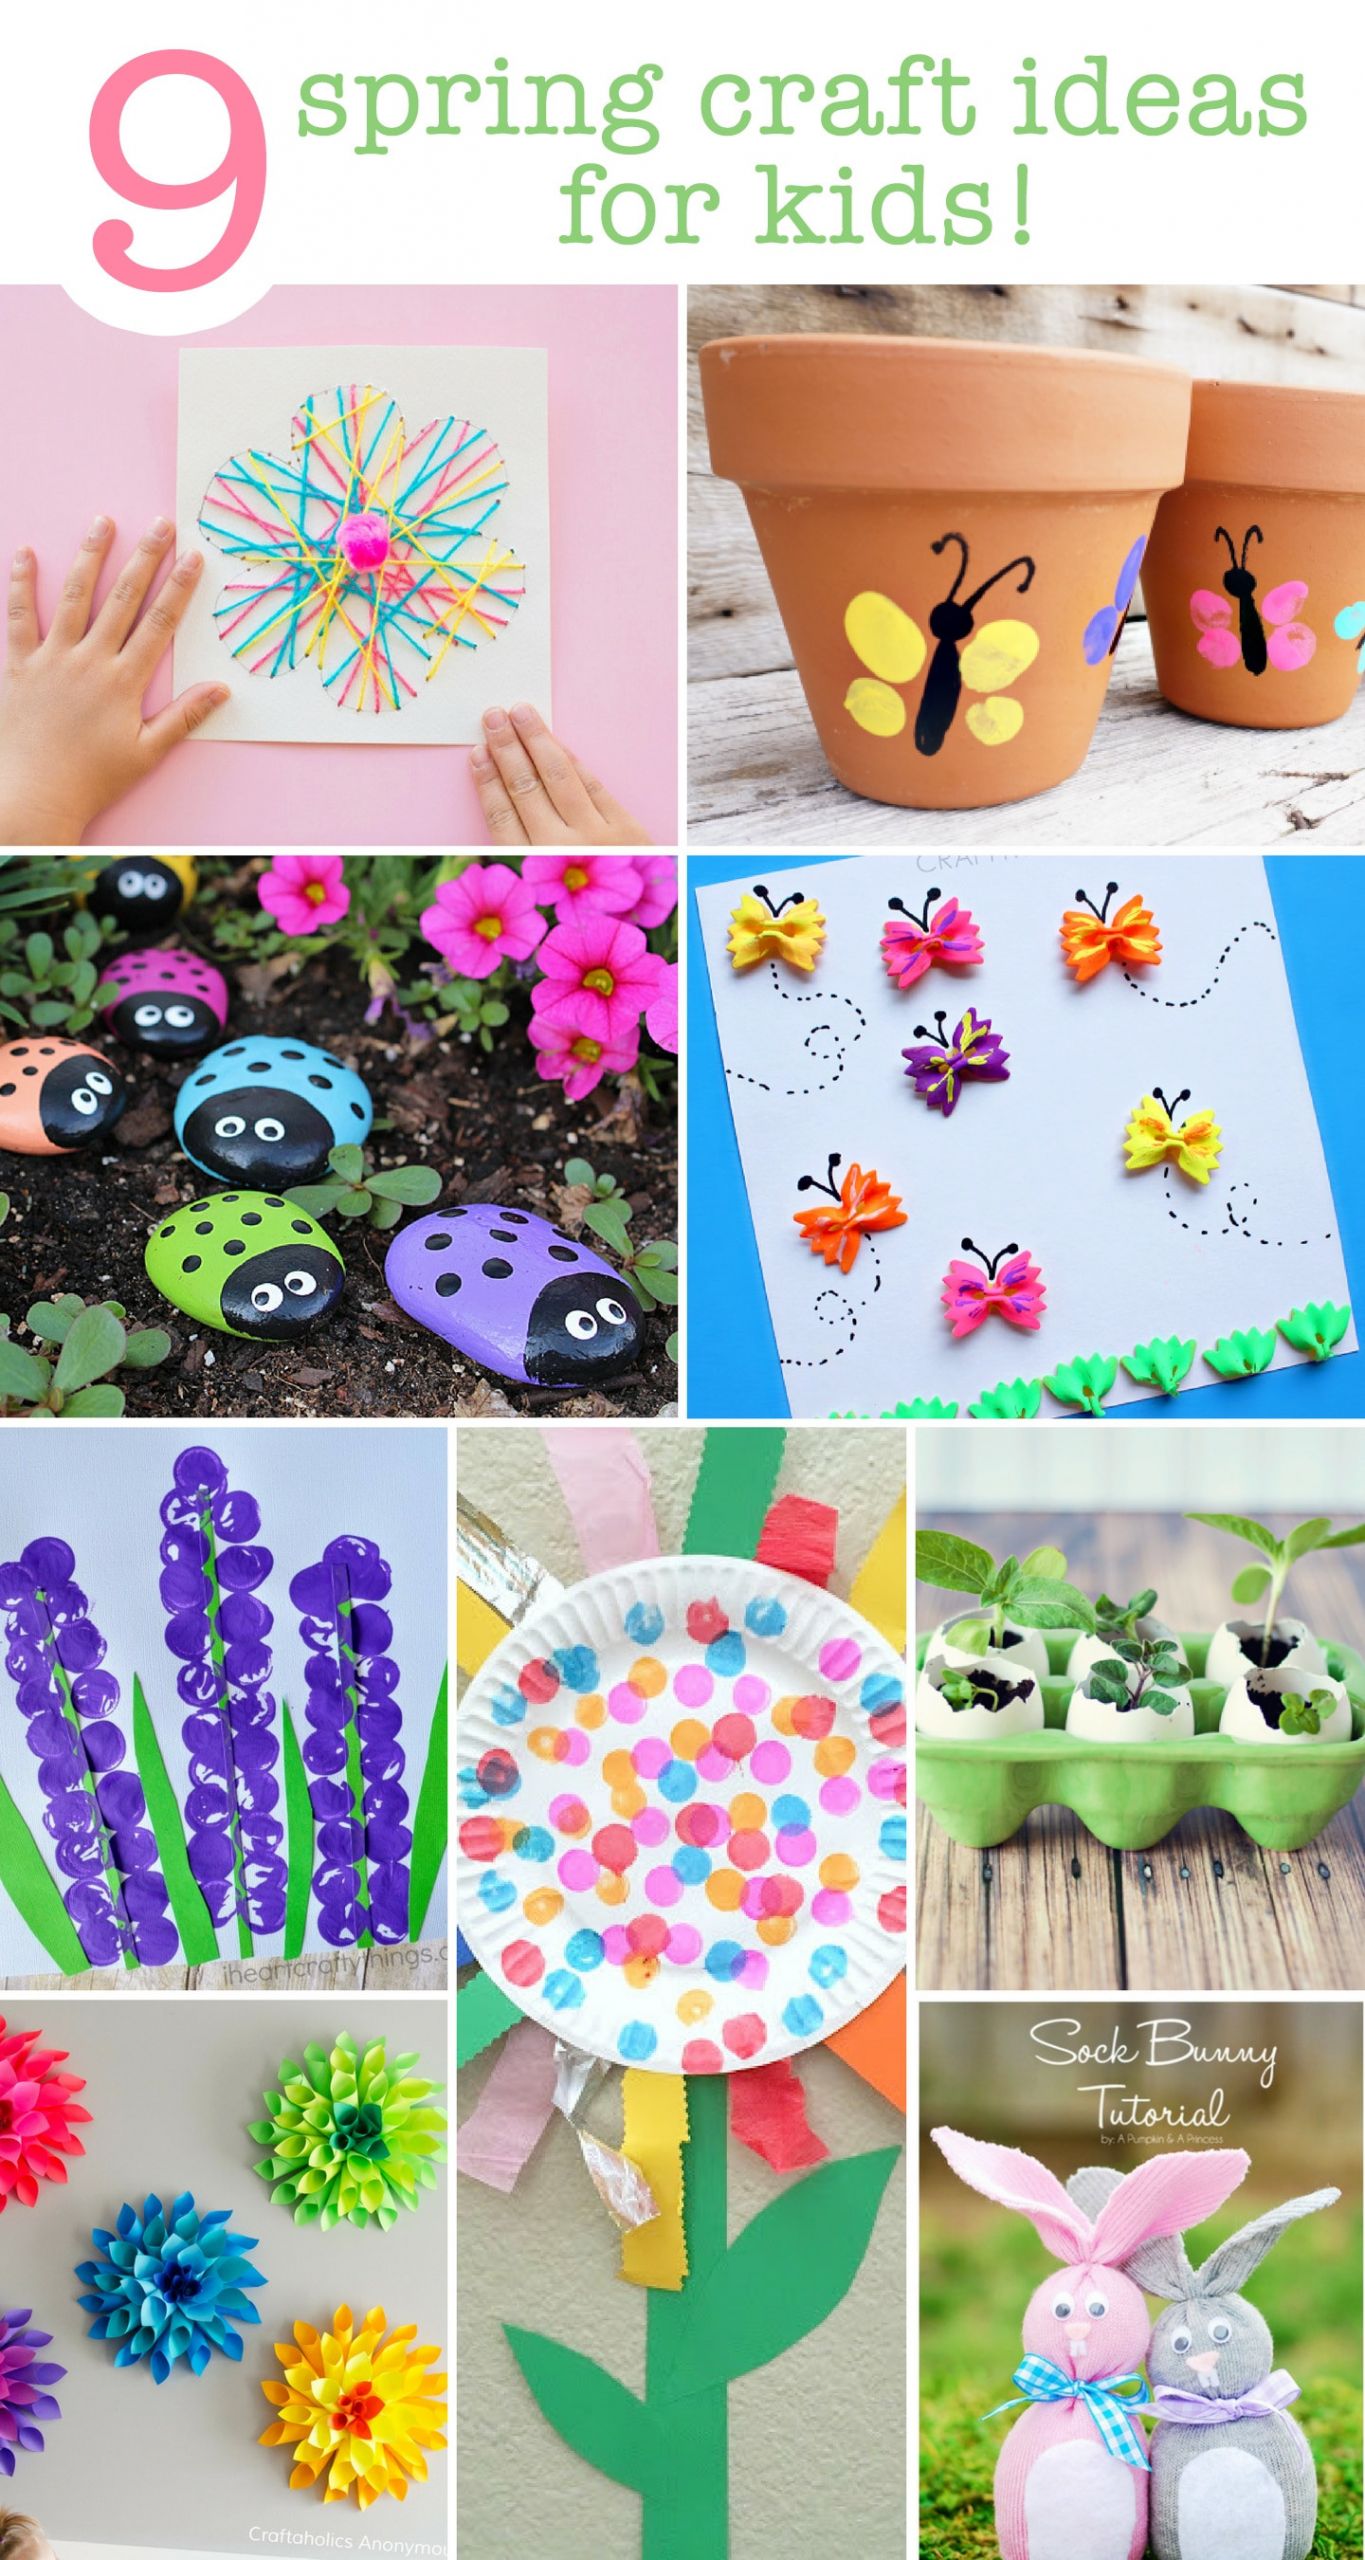 Spring Crafts For Toddlers
 9 Spring Craft Ideas For The Kids